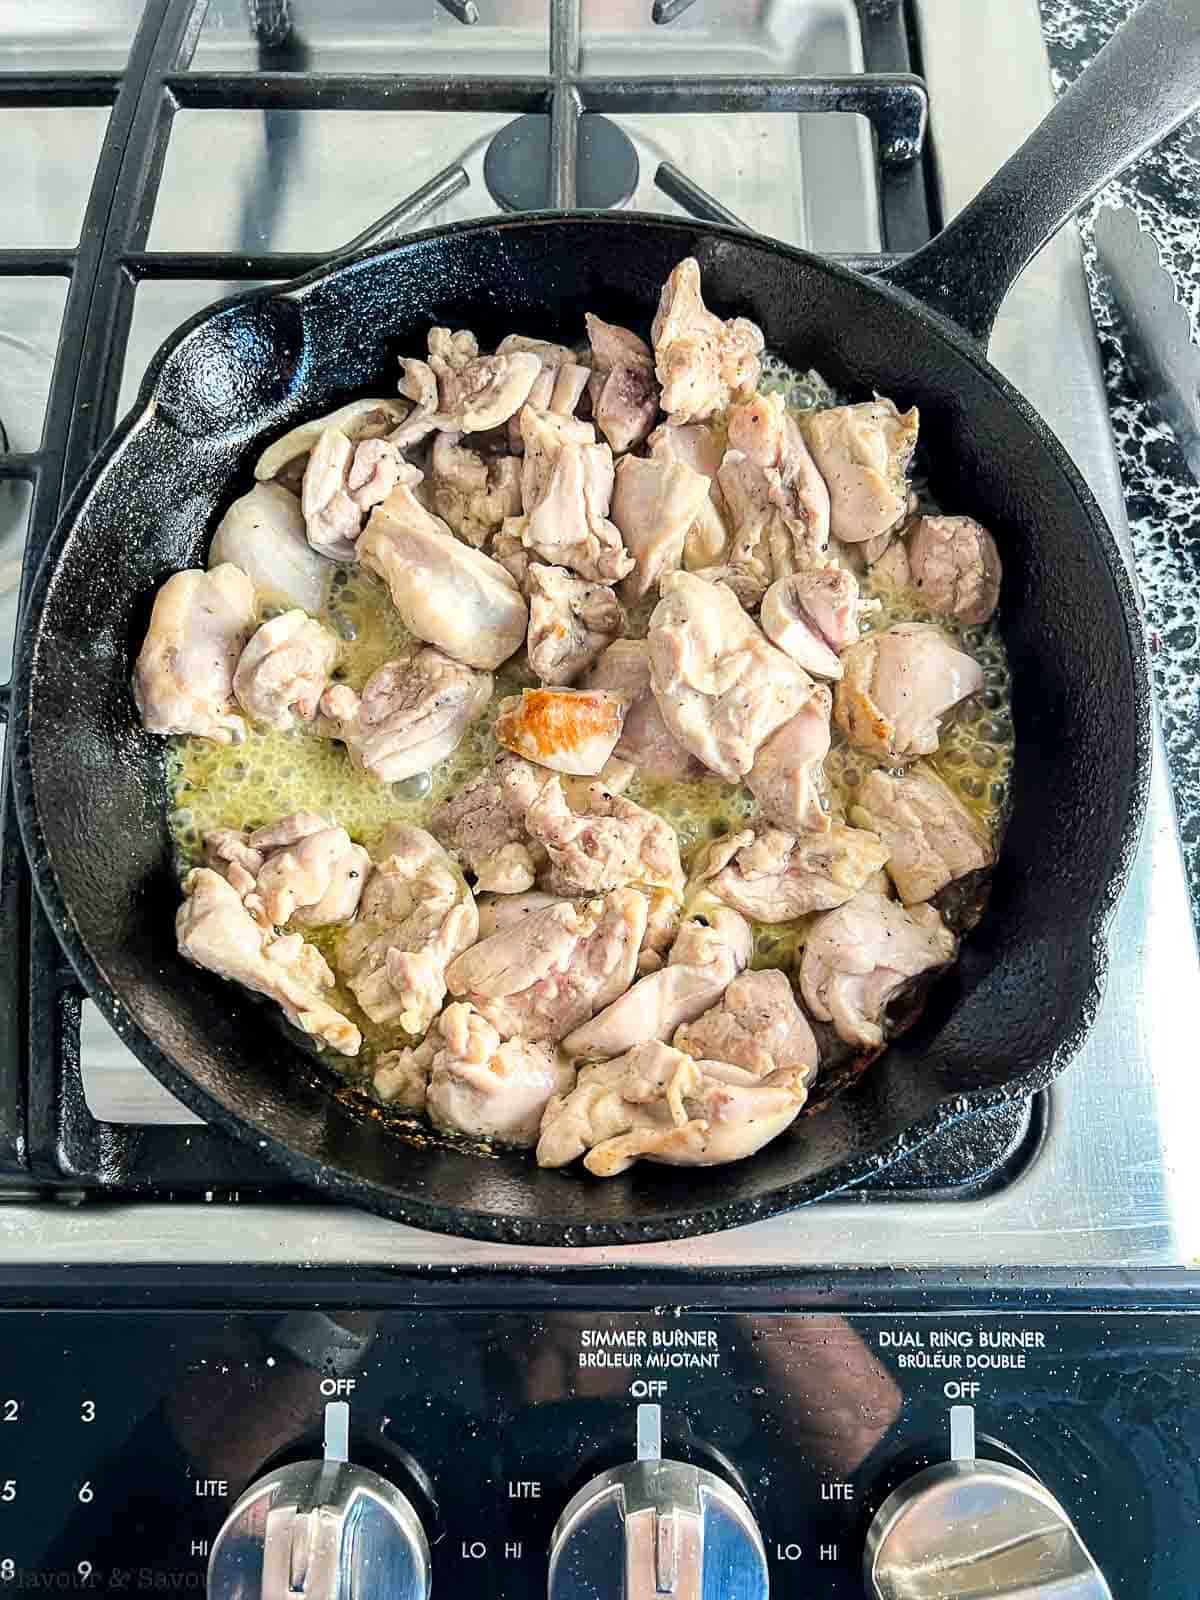 Browning chicken pieces in a cast iron skillet.